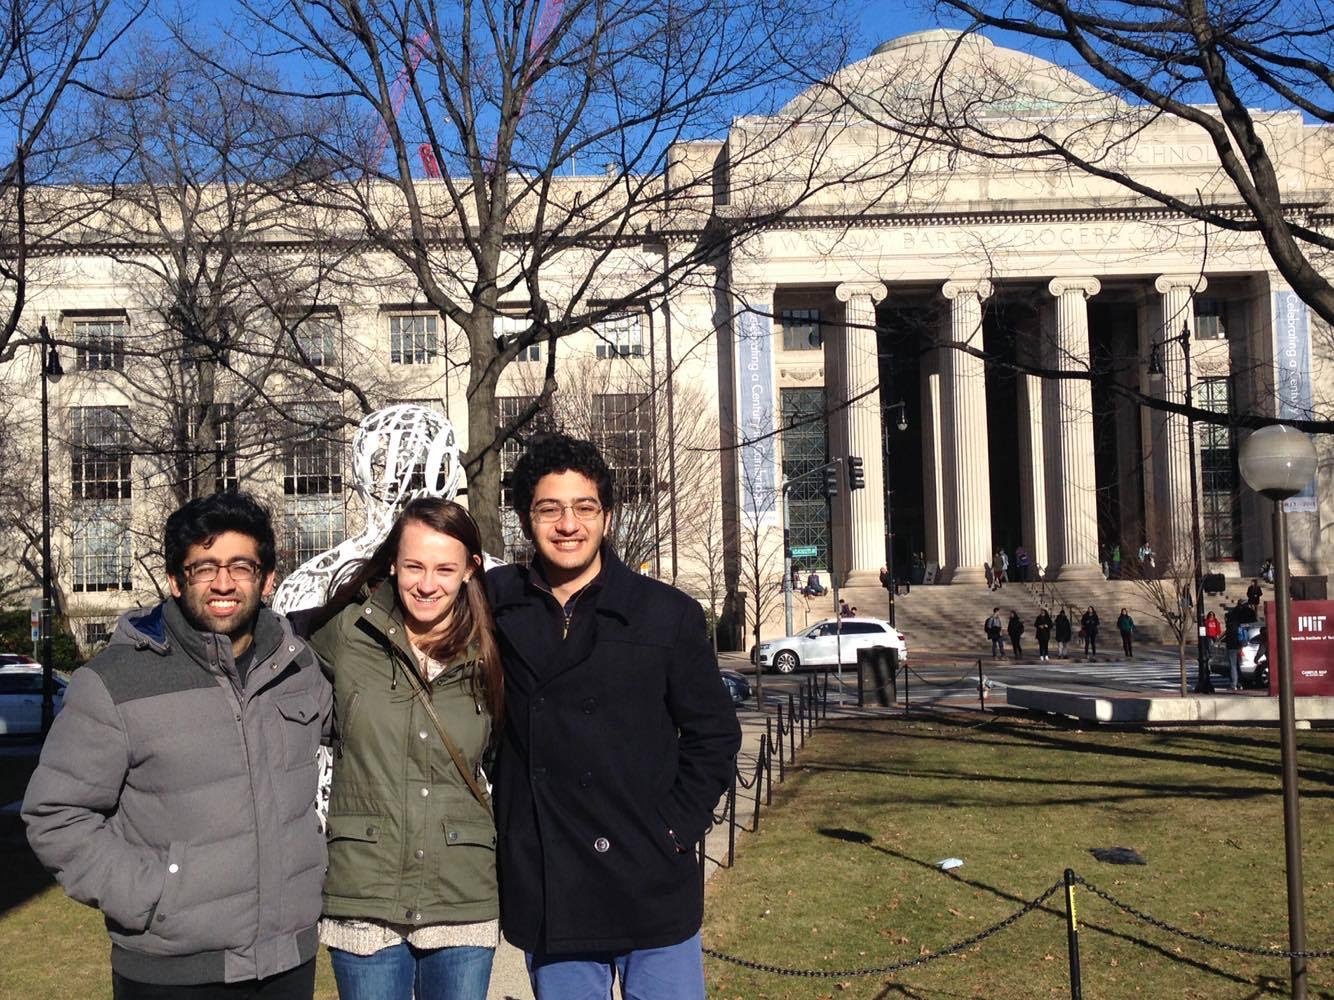 Me with friends in front of an MIT building in Boston, February 2016